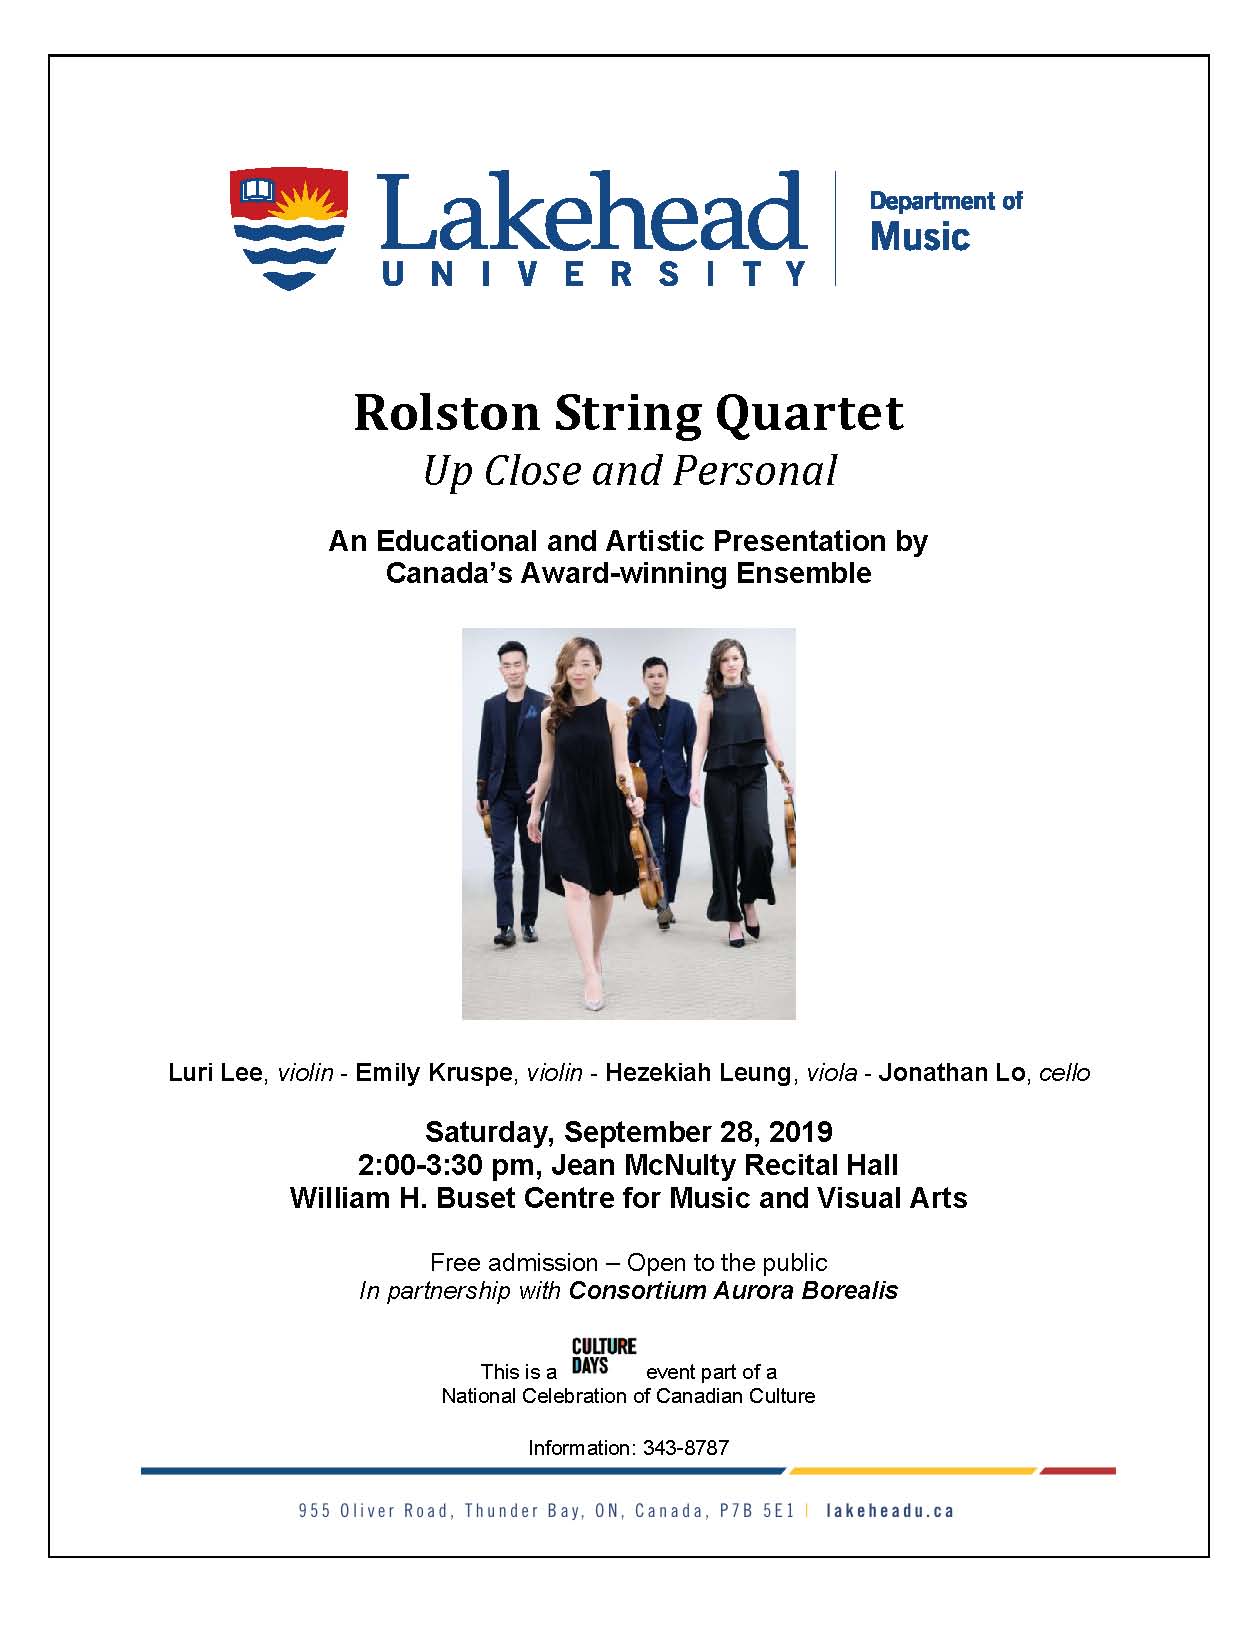 Up Close and Personal - Rolston String Quartet